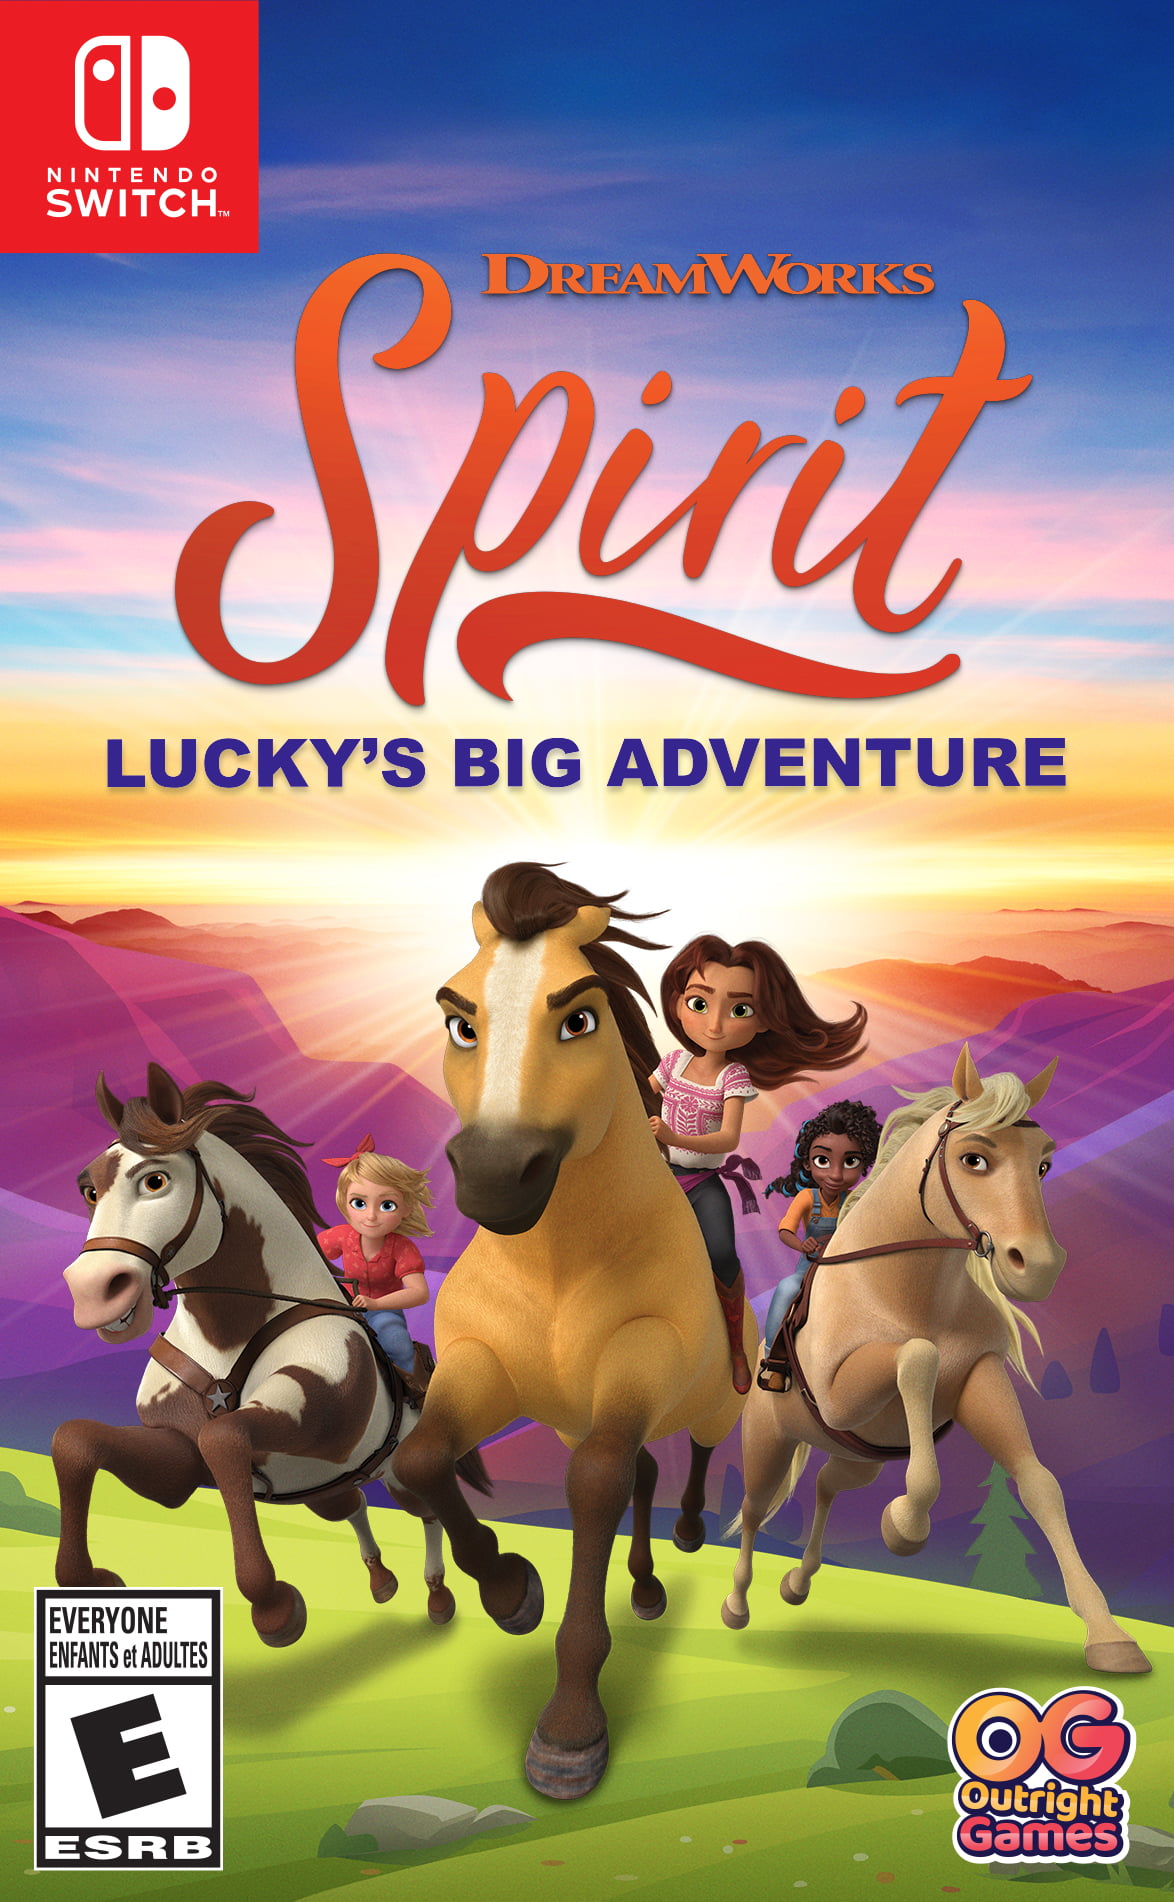 DreamWorks Spirit Lucky's Big Adventure Game for Nintendo Switch $14.88 + Free Shipping w/ Walmart+ or on $35+